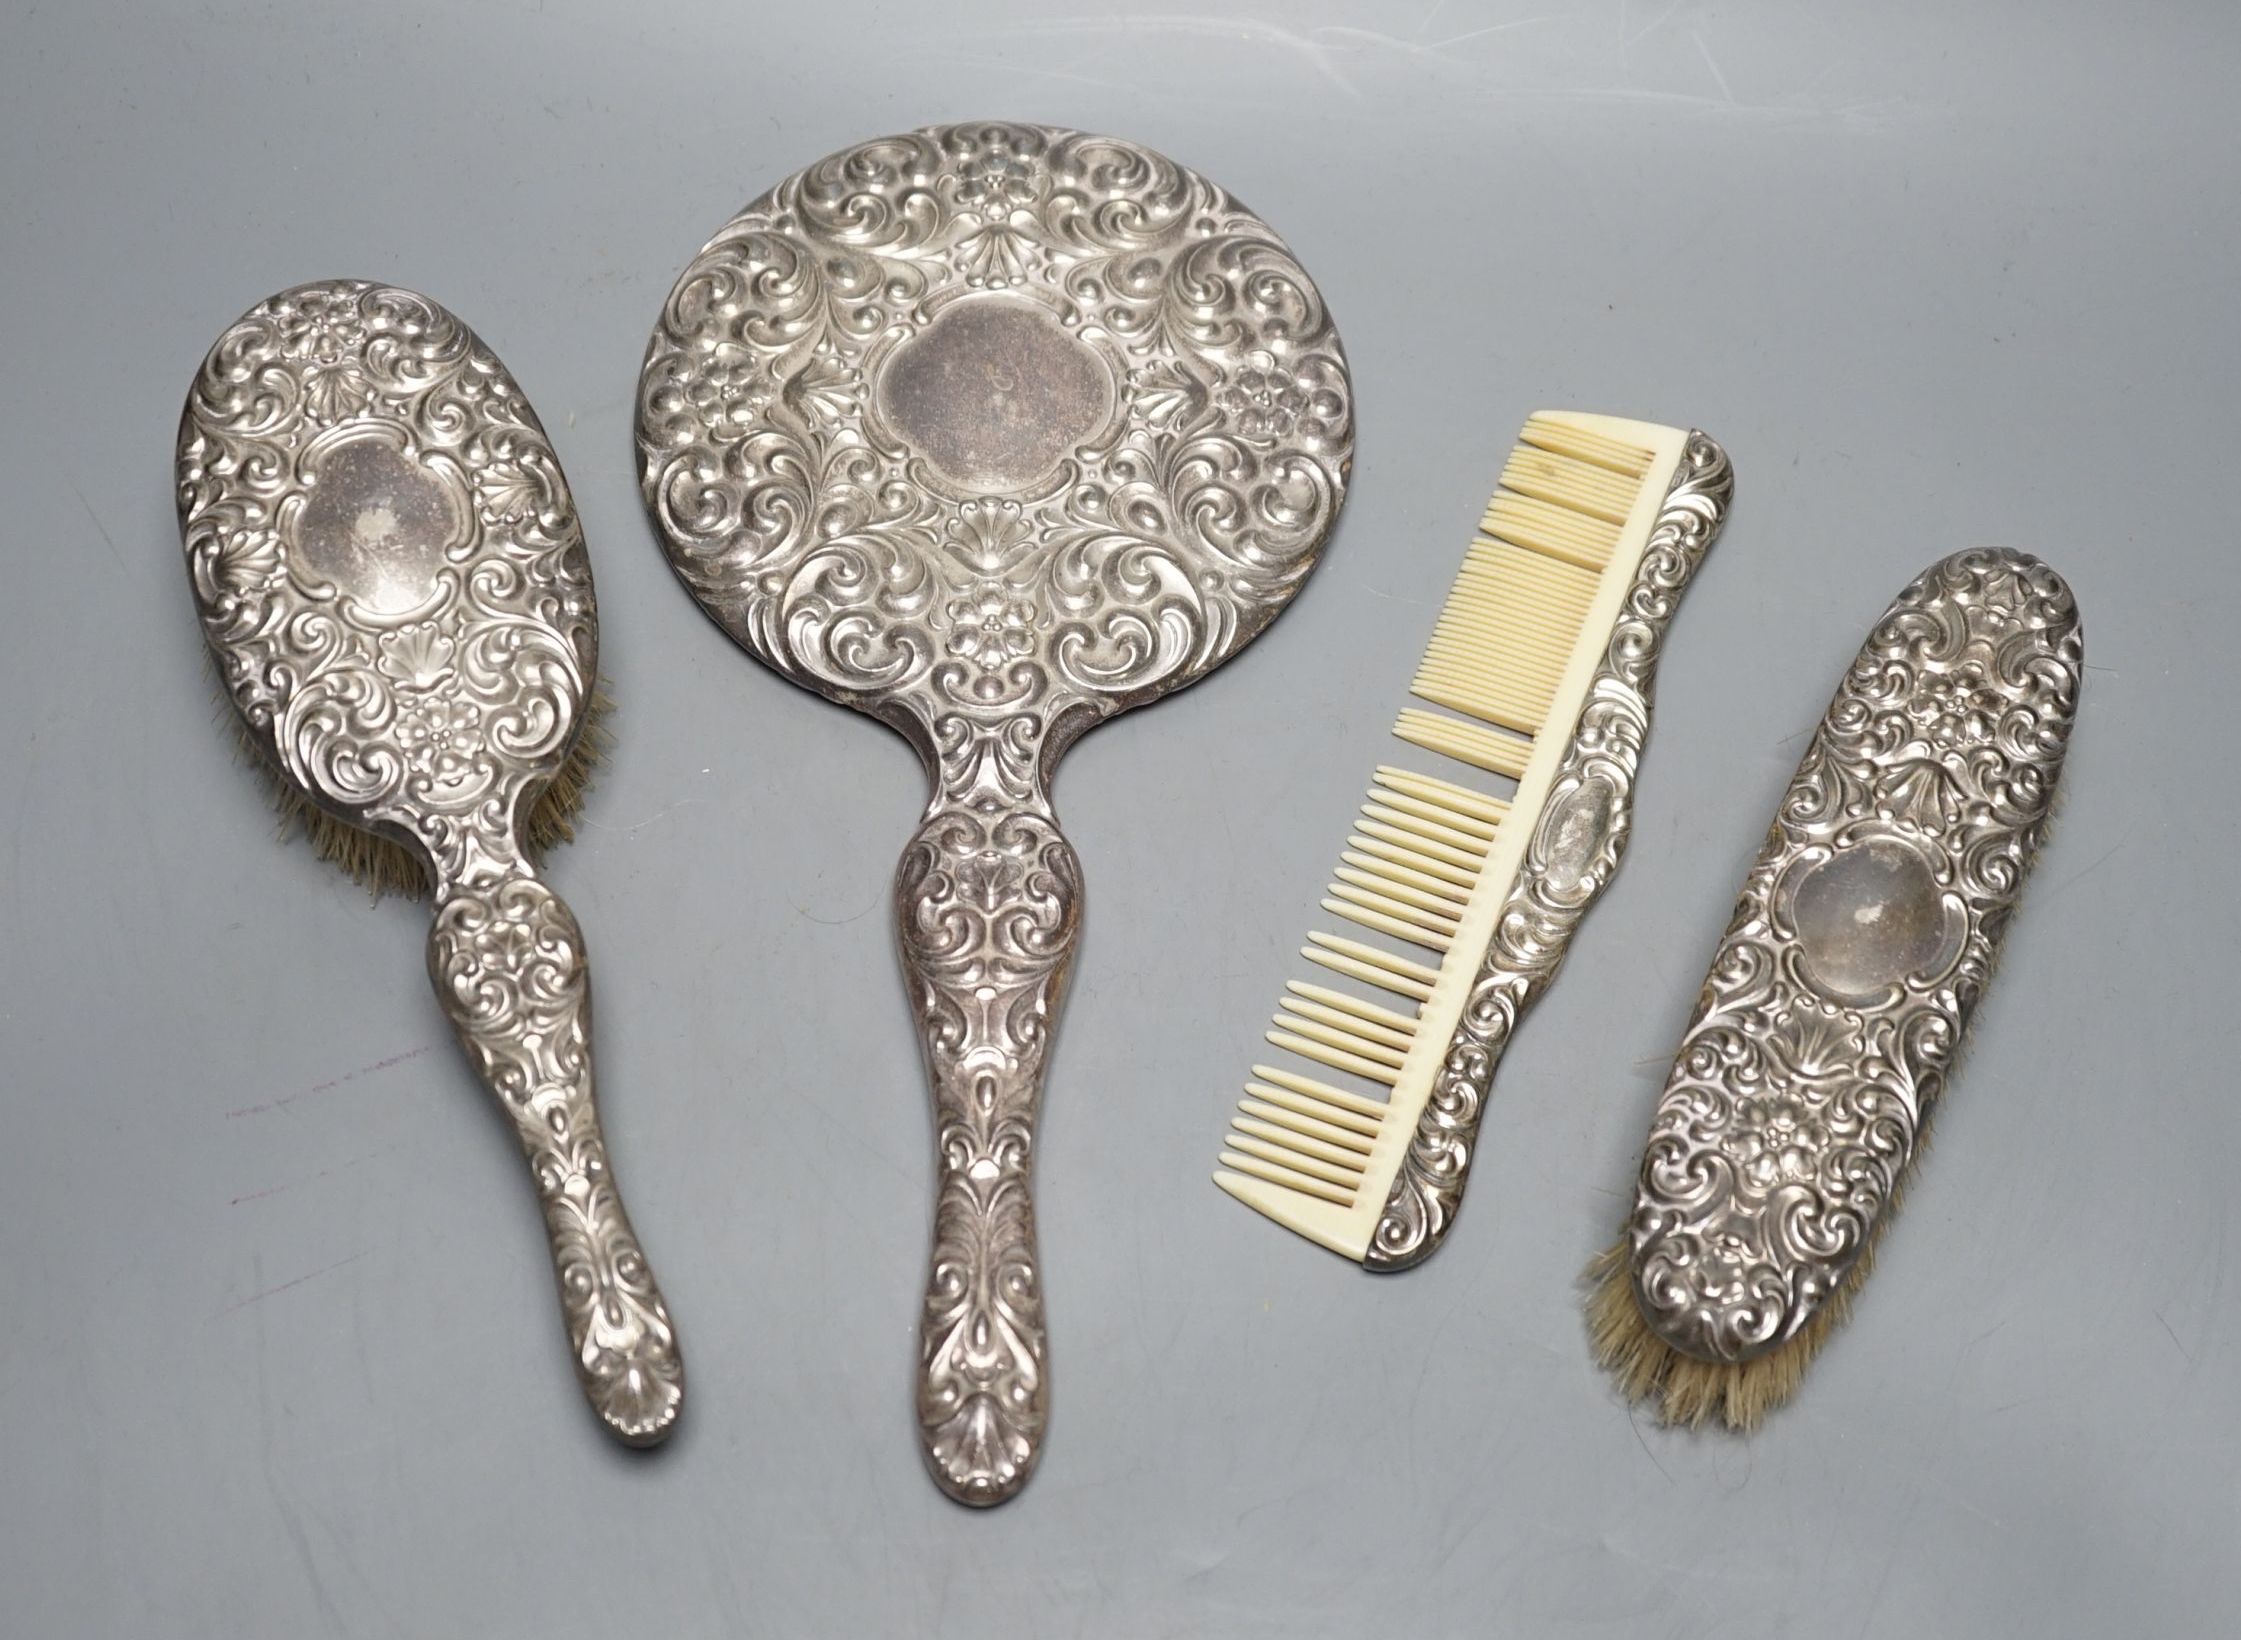 A continental 800 standard white metal mounted four piece mirror and brush set.